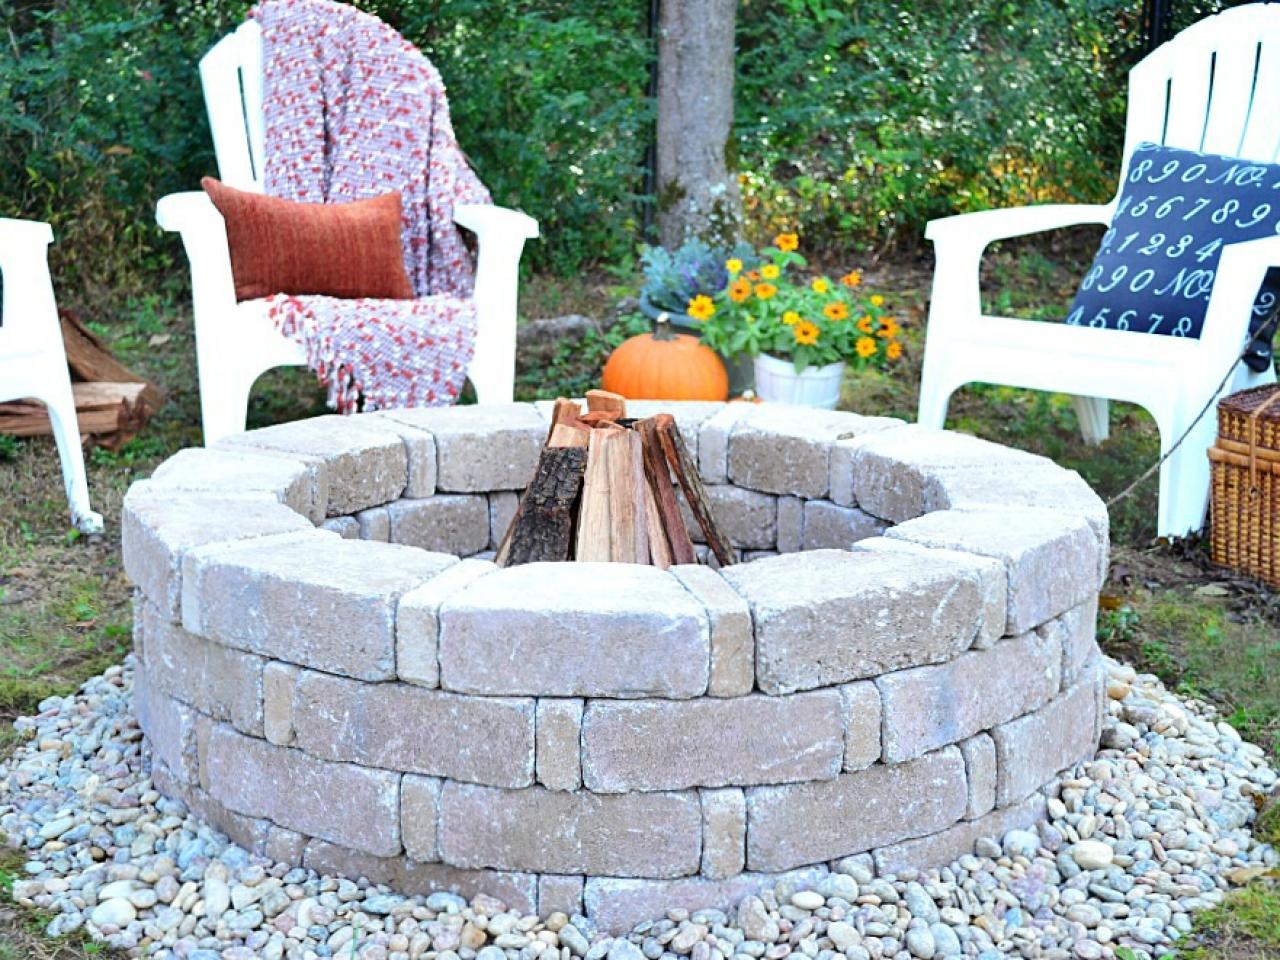 10 Things to Know About Buying a Fire Pit for Your Yard